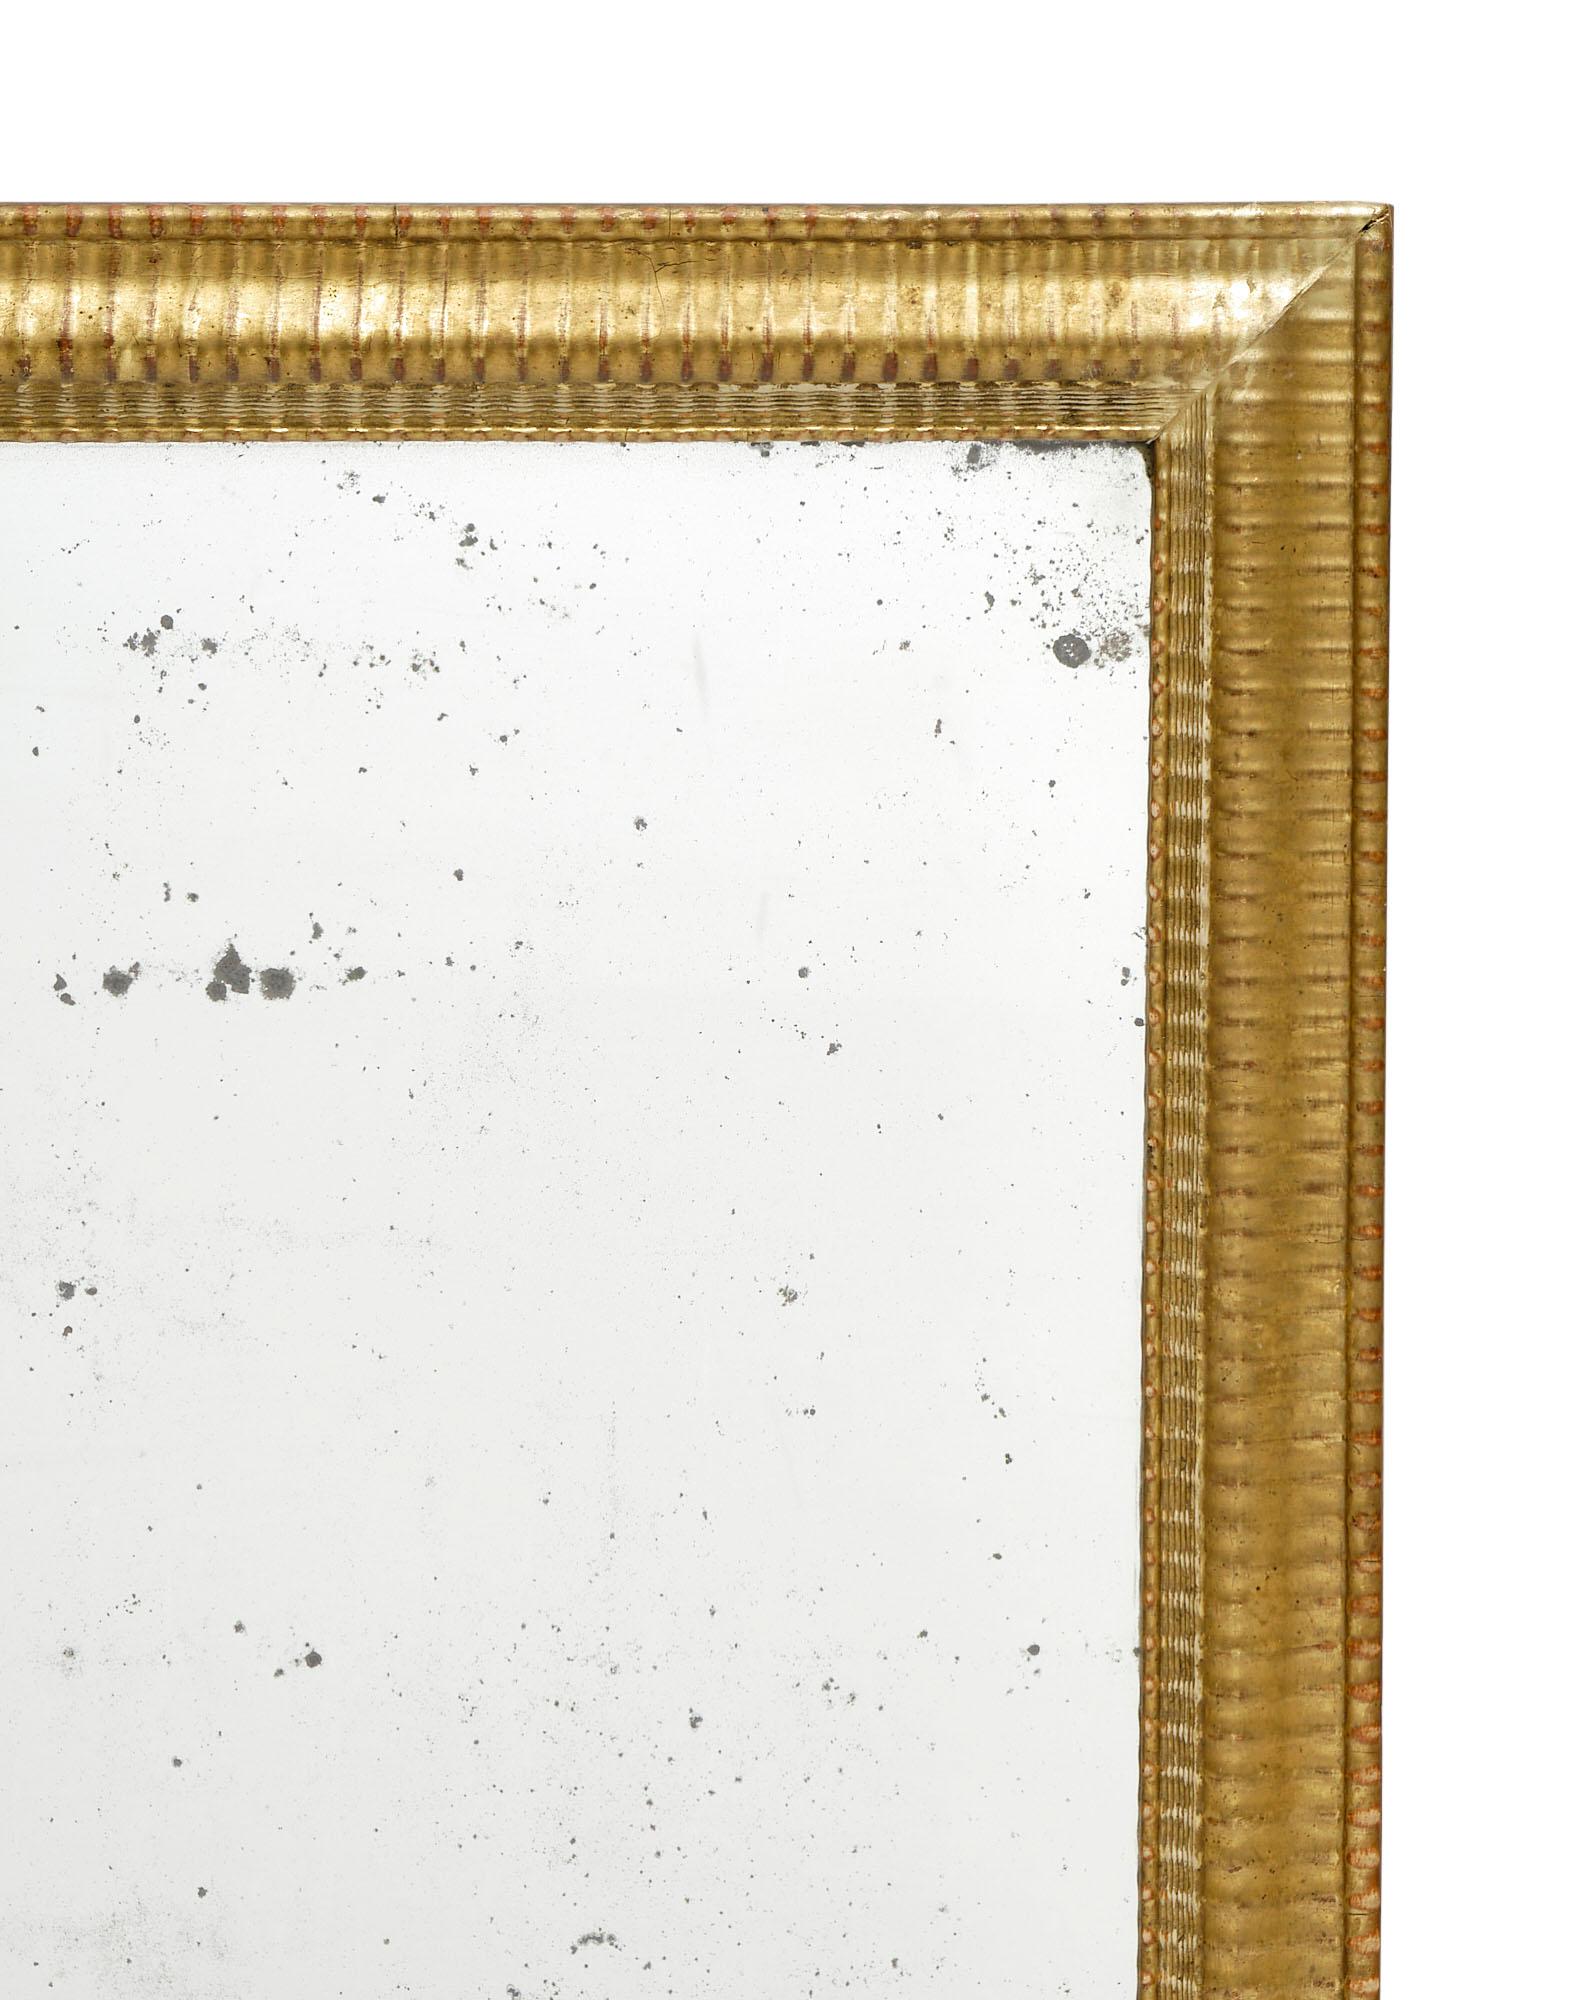 Rectangular mirror featuring the original mercury mirror and an elegant gold leafed frame. The frame has an undulating hand-carved texture with a beautiful, original patina. The terra cotta color shows through the beautiful gold leafing.